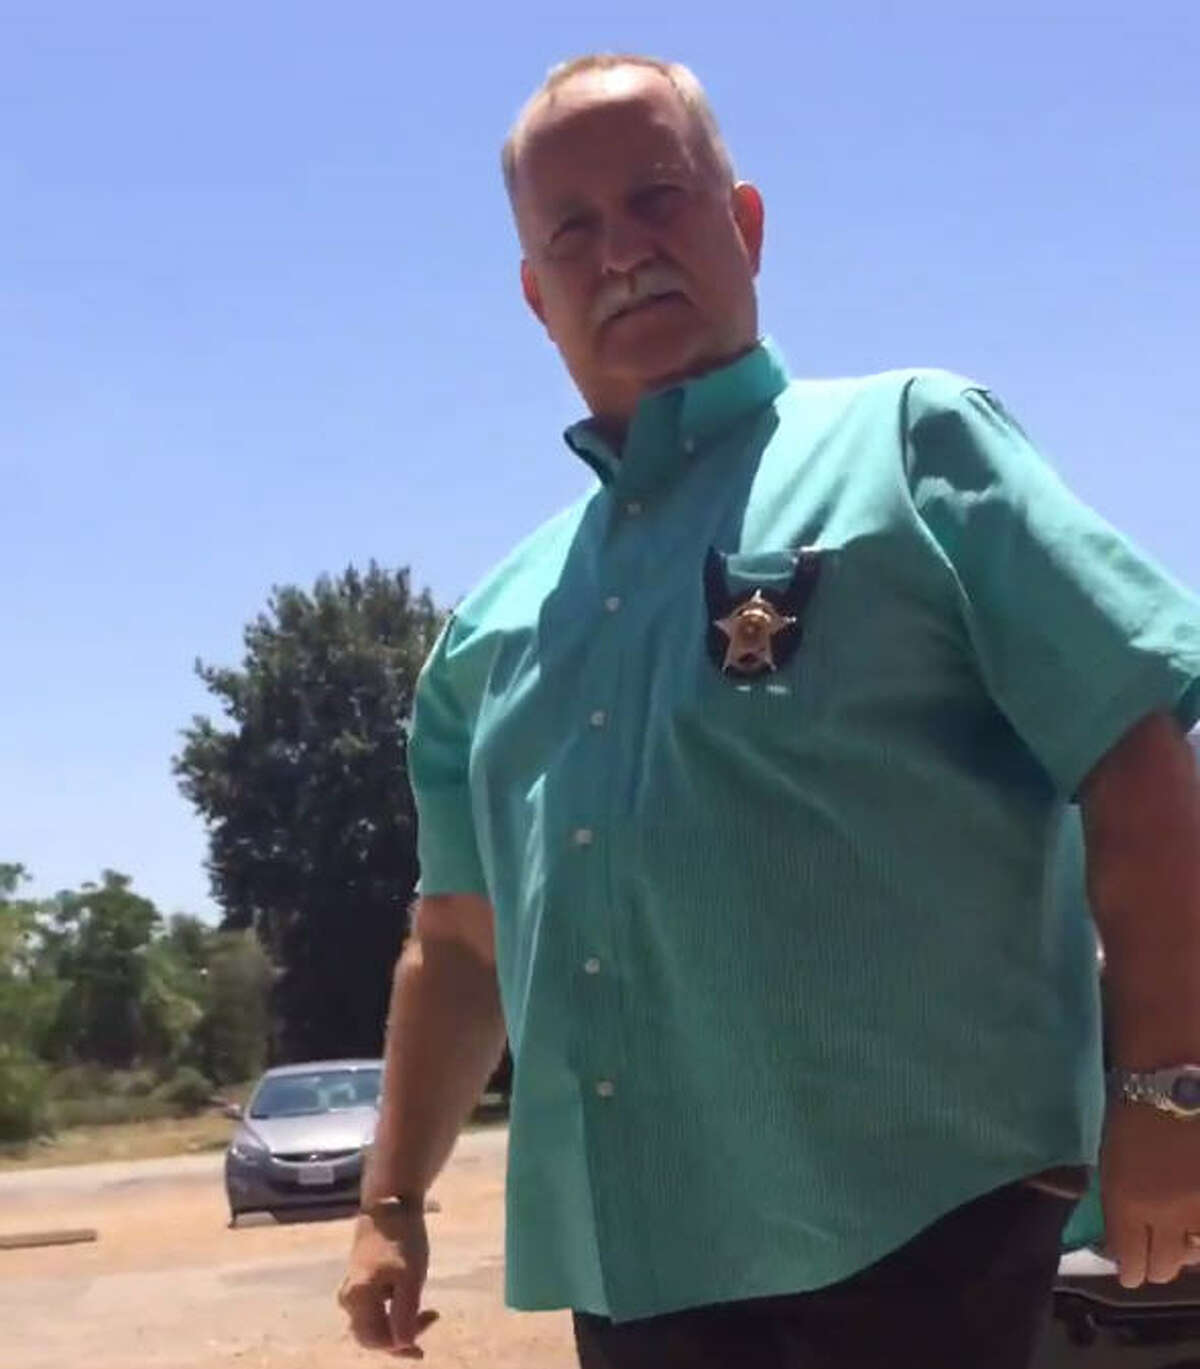 Houston clergy member Hannah Adair Bonner tweeted a video of Waller County Sheriff Glenn Smith suggesting she return to her "church of Satan" during a Monday protest in Waller County over the death of Sandra Bland.